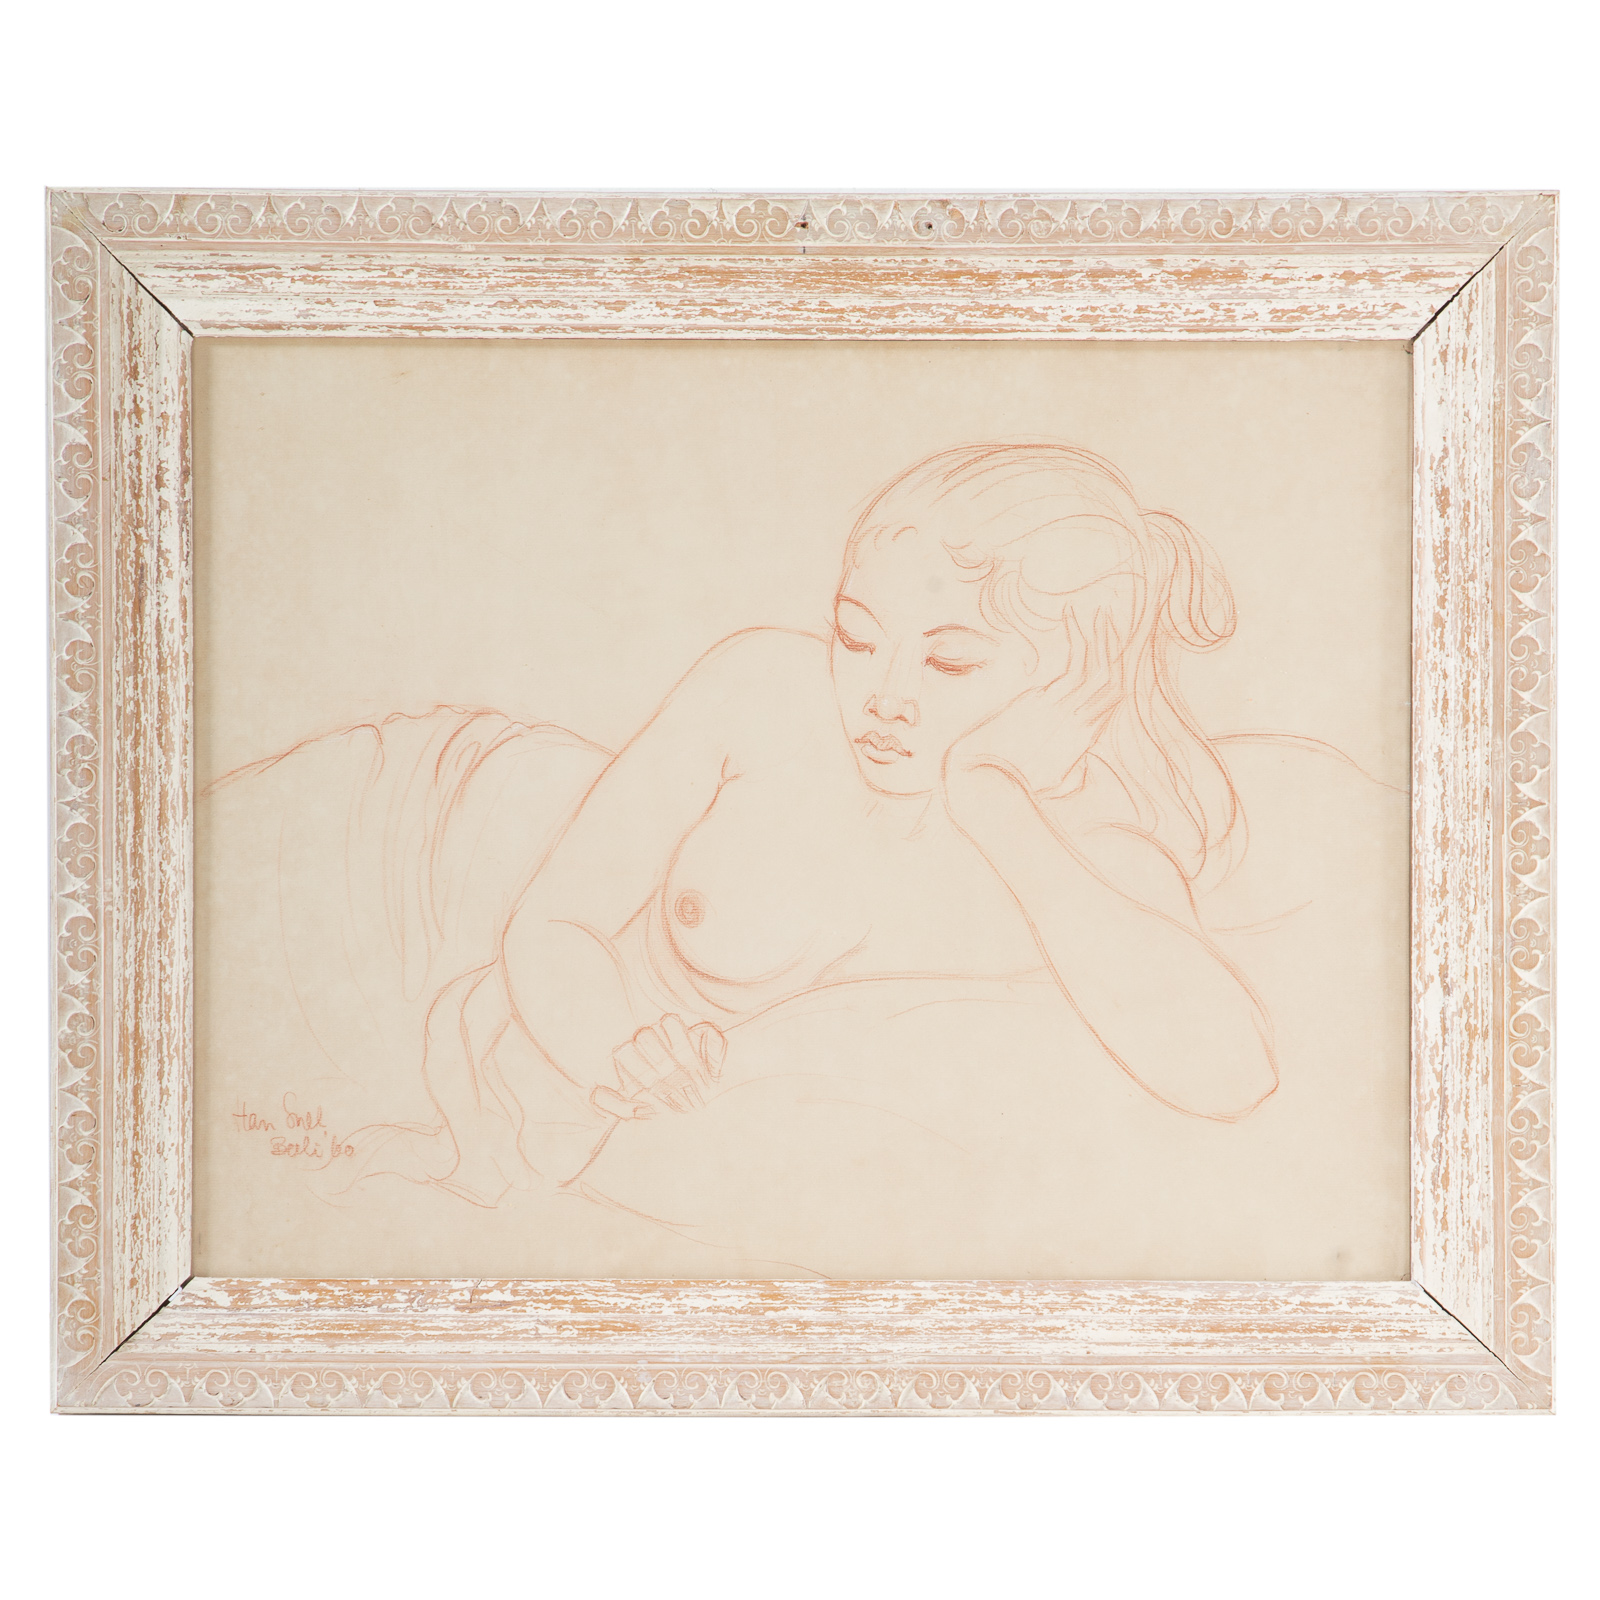 HAN SNEL RECLINING NUDE RED PENCIL 36a81c